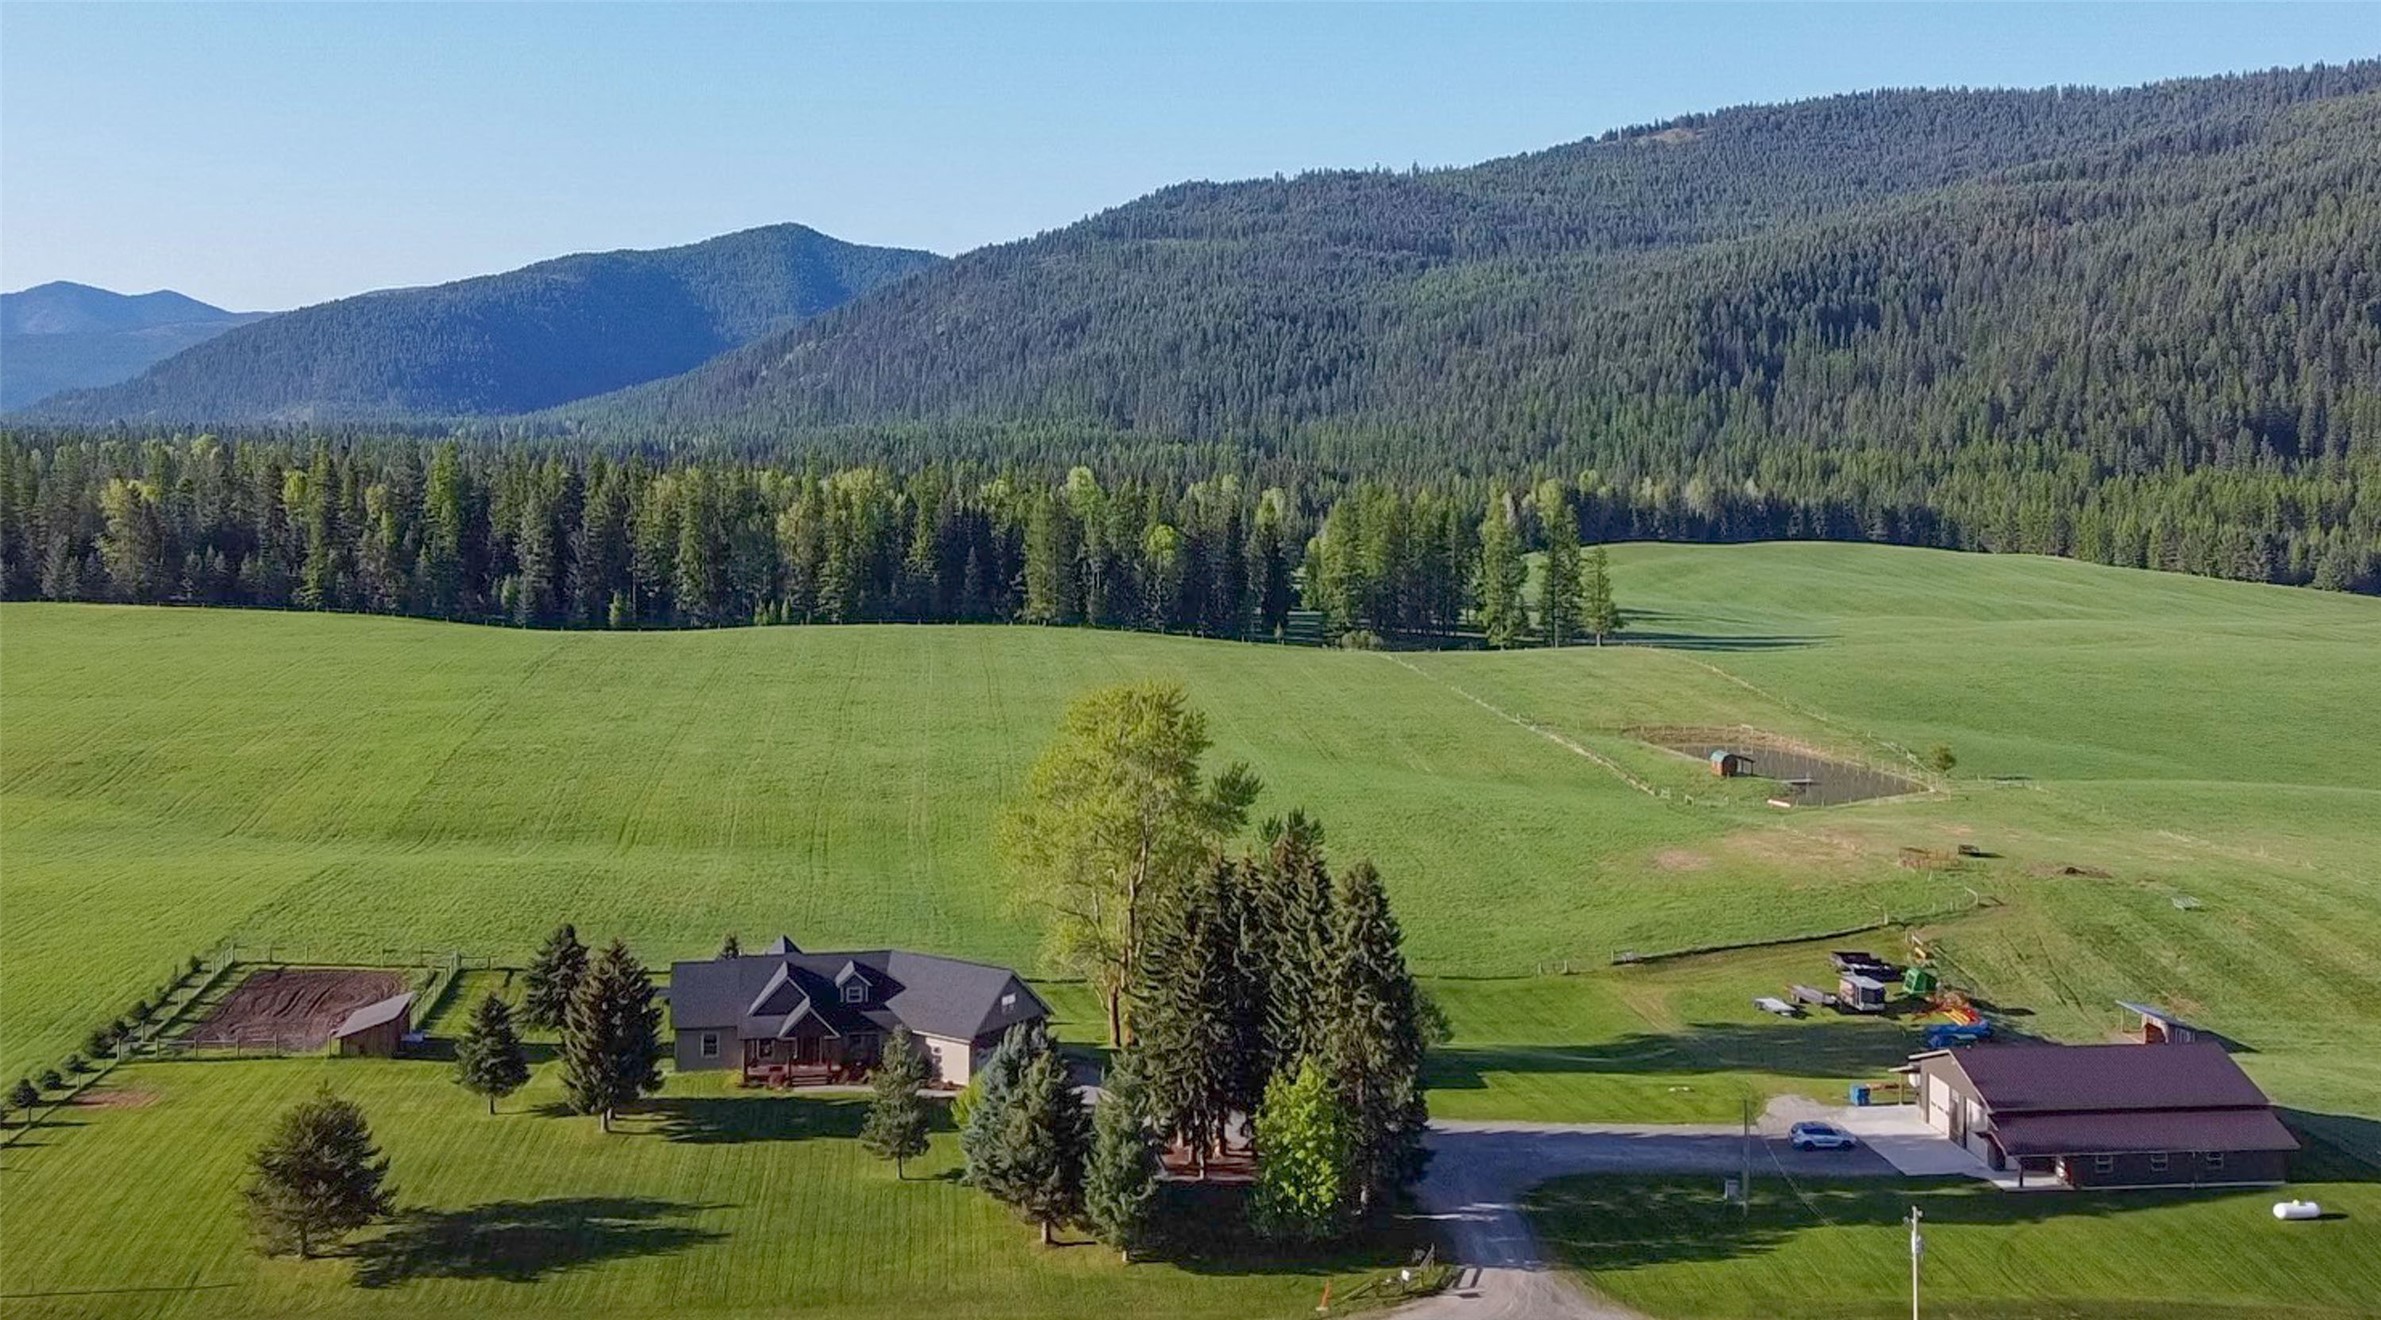 Experience all the best of Montana on 30+- acres of fenced hay ground with a pond, custom, craftsman home of 4576 sq. ft., 7 bedroom, 5 baths and a 40x60 shop with additional 12' enclosed bays. 

Custom beam work greets you on the covered front porch, entering into a generous foyer with large coat closet and beautiful circle sawn fir flooring.  Gorgeous, wide rustic alder trim and doors accentuate the open floor plan.  Custom fantastic antiqued rustic alder cabinets are aesthetic & work wise with a Costco/Trader Joe pantry near. Loads of formica counter space with Gemloc edging, including ample seating, are ready for your amazing kitchen creations.  Main floor master suite with walk-in closet and soaking tub with a view.  

The panoramic mountain views are indescribable.  Whitepine Creek is known for unending recreational possibilities, with huckleberries, hunting, biking, hiking, horseback riding and access to millions of miles of National Forest.  Too much to list!  Welcome home. Barn wood wainscoting accentuates the 40'x60' shop with 14' side walls and enclosed 12' shed-roofed rooms.  A sizable office toward the county road has a built-in granite-topped desk, 1/2 bath and incredible views for you telecommuters. In-floor heat is a great touch.  12'x12' garage doors should accommodate whatever toys you want!  White metal finish on the interior of the main portion of the building make it light, bright and clean.  

The west wing of the home houses three bedrooms, a sitting room and a double-sinked full bath.  The lower level has a master suite with 3/4 bath, 2 additional bedrooms, a bonus room, utility room, w/d hook-ups, a large full bath, and wood stove-heated recreation room.  Laundry available on main and lower floors, with laundry chute in upstairs bath.  Once in the oversized two-car garage, you enter into the utility/laundry room to the right or the pantry and kitchen down the hall to the left.  Powder room on the main, along with a deck overlooking the fields.  A propane furnace with heat pump and A/C, as well as wood heat warm the home, and the spray foam and fiberglass information creates an efficient and easy to heat home (R-23 walls and R-50 ceiling).  

The fenced garden area overflows with produce from many years of production in its soil, along with apple trees.  A wood shed full of split and stacked wood for next year isn't far from the outside accessed woodbox next to the wood stove in the basement.  Old growth trees surround the house and an underground sprinkler system makes maintaining lush three-acre lawn a breeze. 21 acres of the land are in hay field, while 6 acres contain a fenced pasture.  All of this is possible from a 281' deep, 30 gallon per minute well with a continuous pressure pump installed in 2021.  The pond is fenced with a dock and shed with views up Whitepine Creek.

Bring your fishing pole and dreams.  You won't have to do anything to this one.  It is move-in ready!